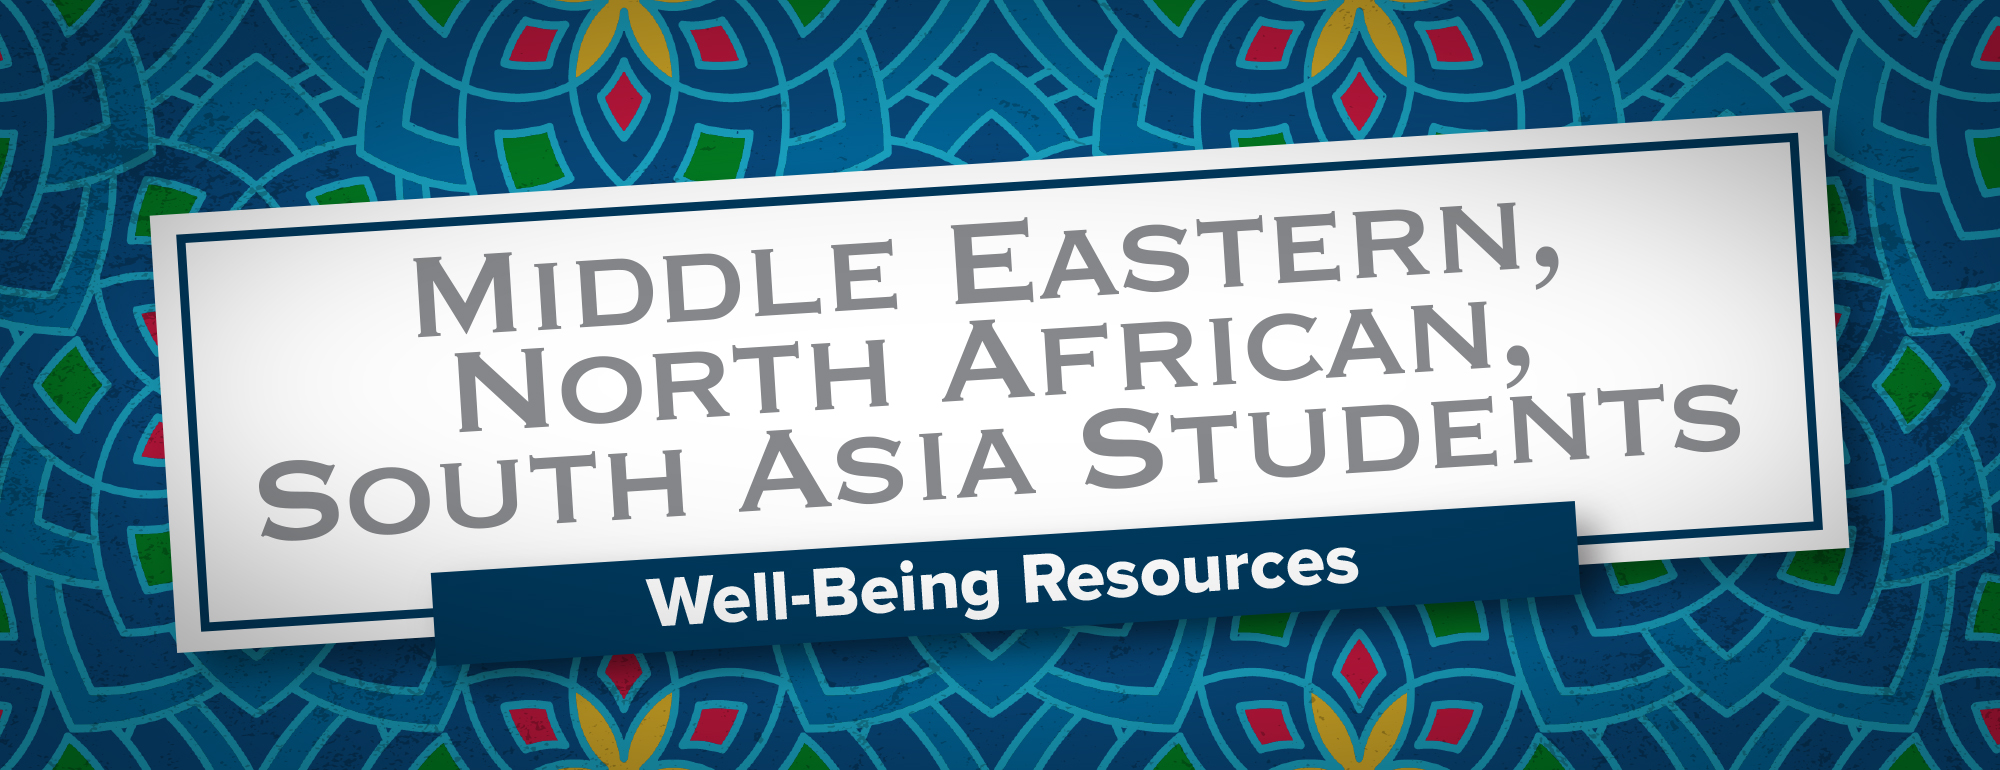 Middle Eastern, Northern African, South Asia Students